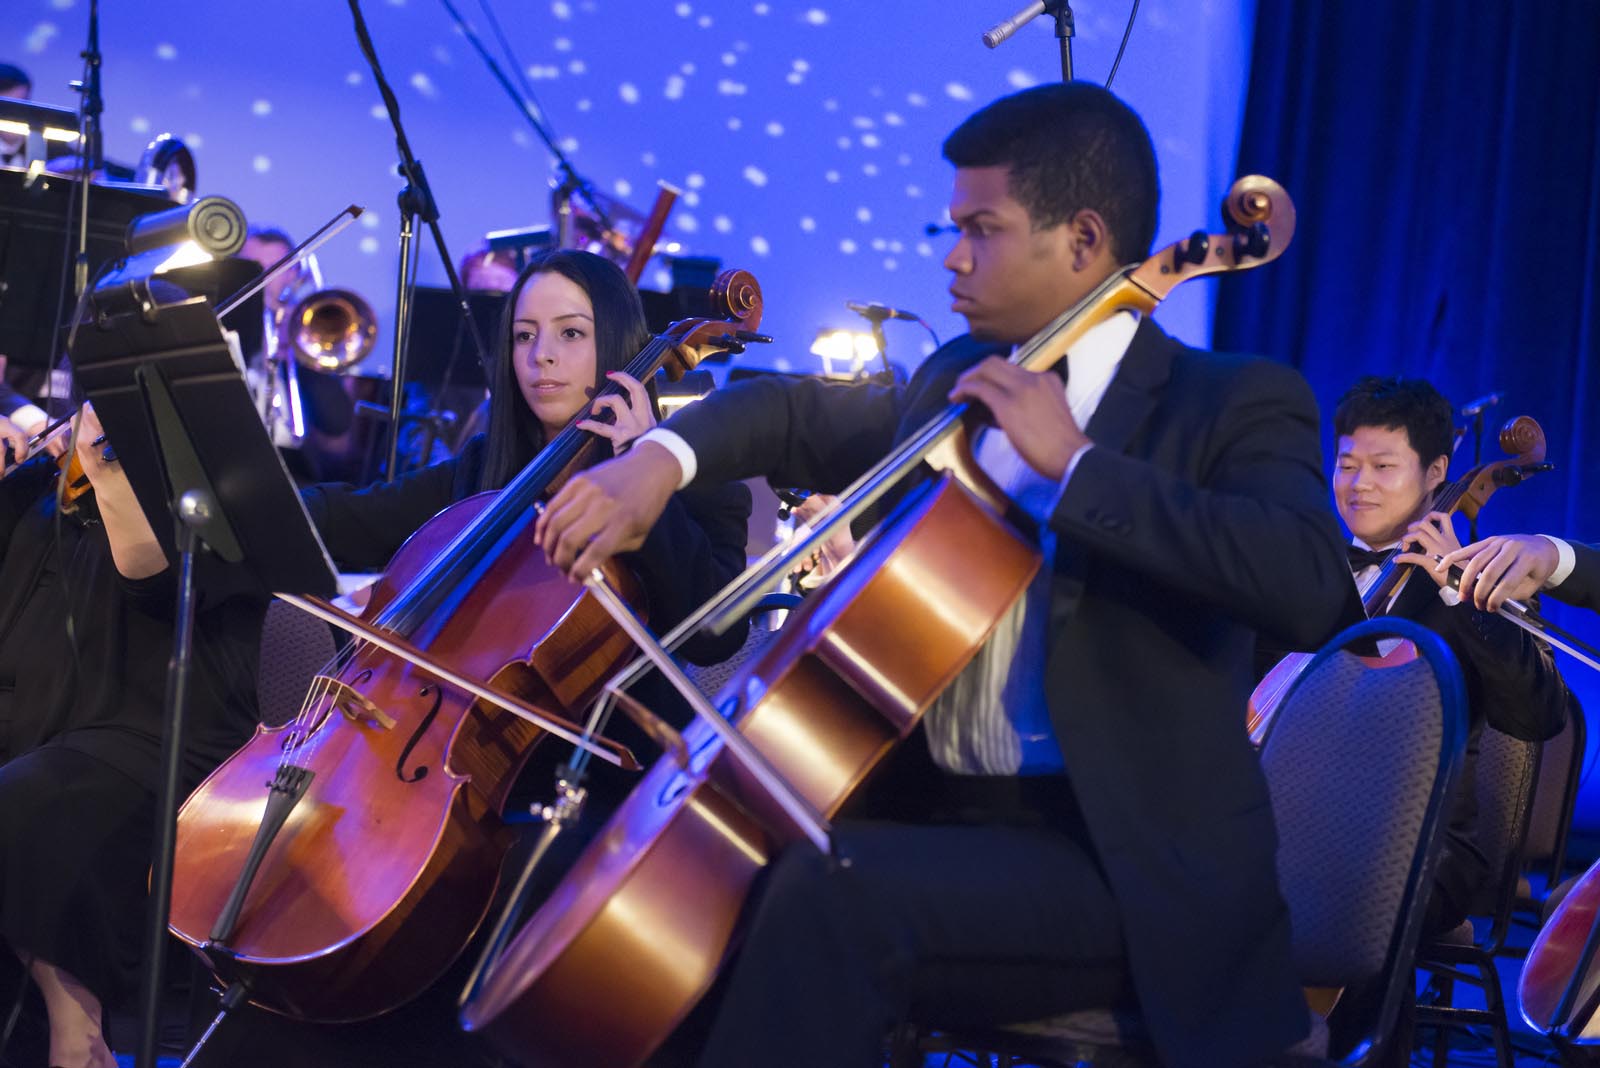 Student musicians play string instruments as part of an ensemble.